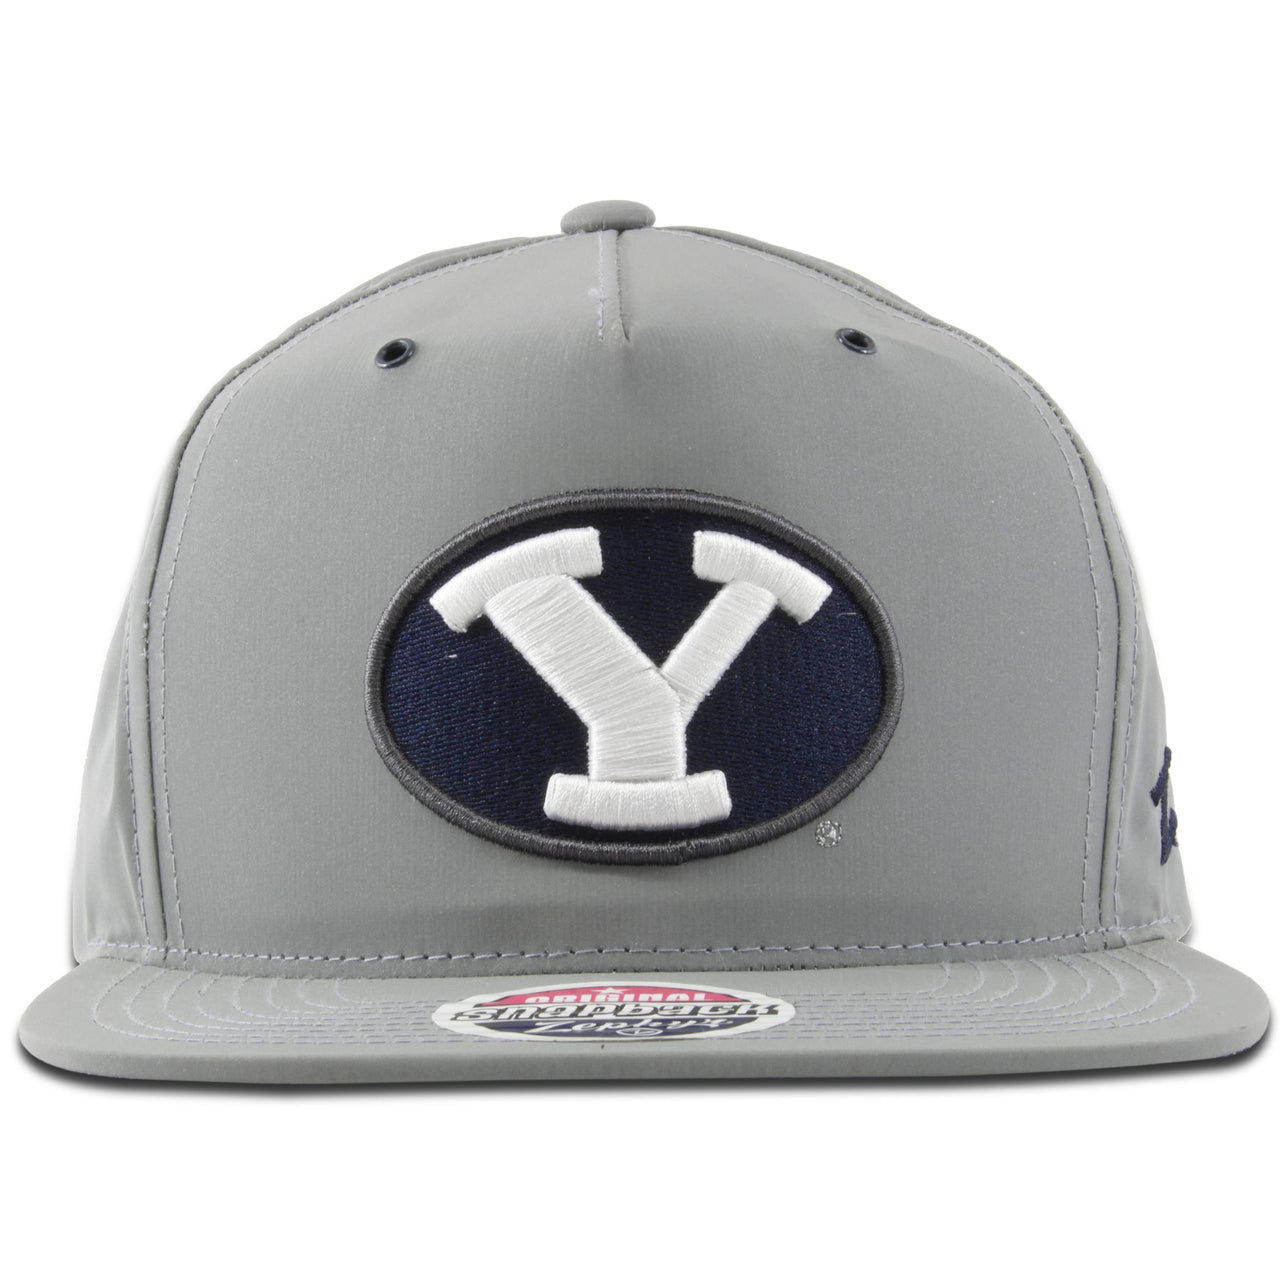 The reflective BYU gray adjustable snapback hat features the BYU logo embroidered on the front in 3D